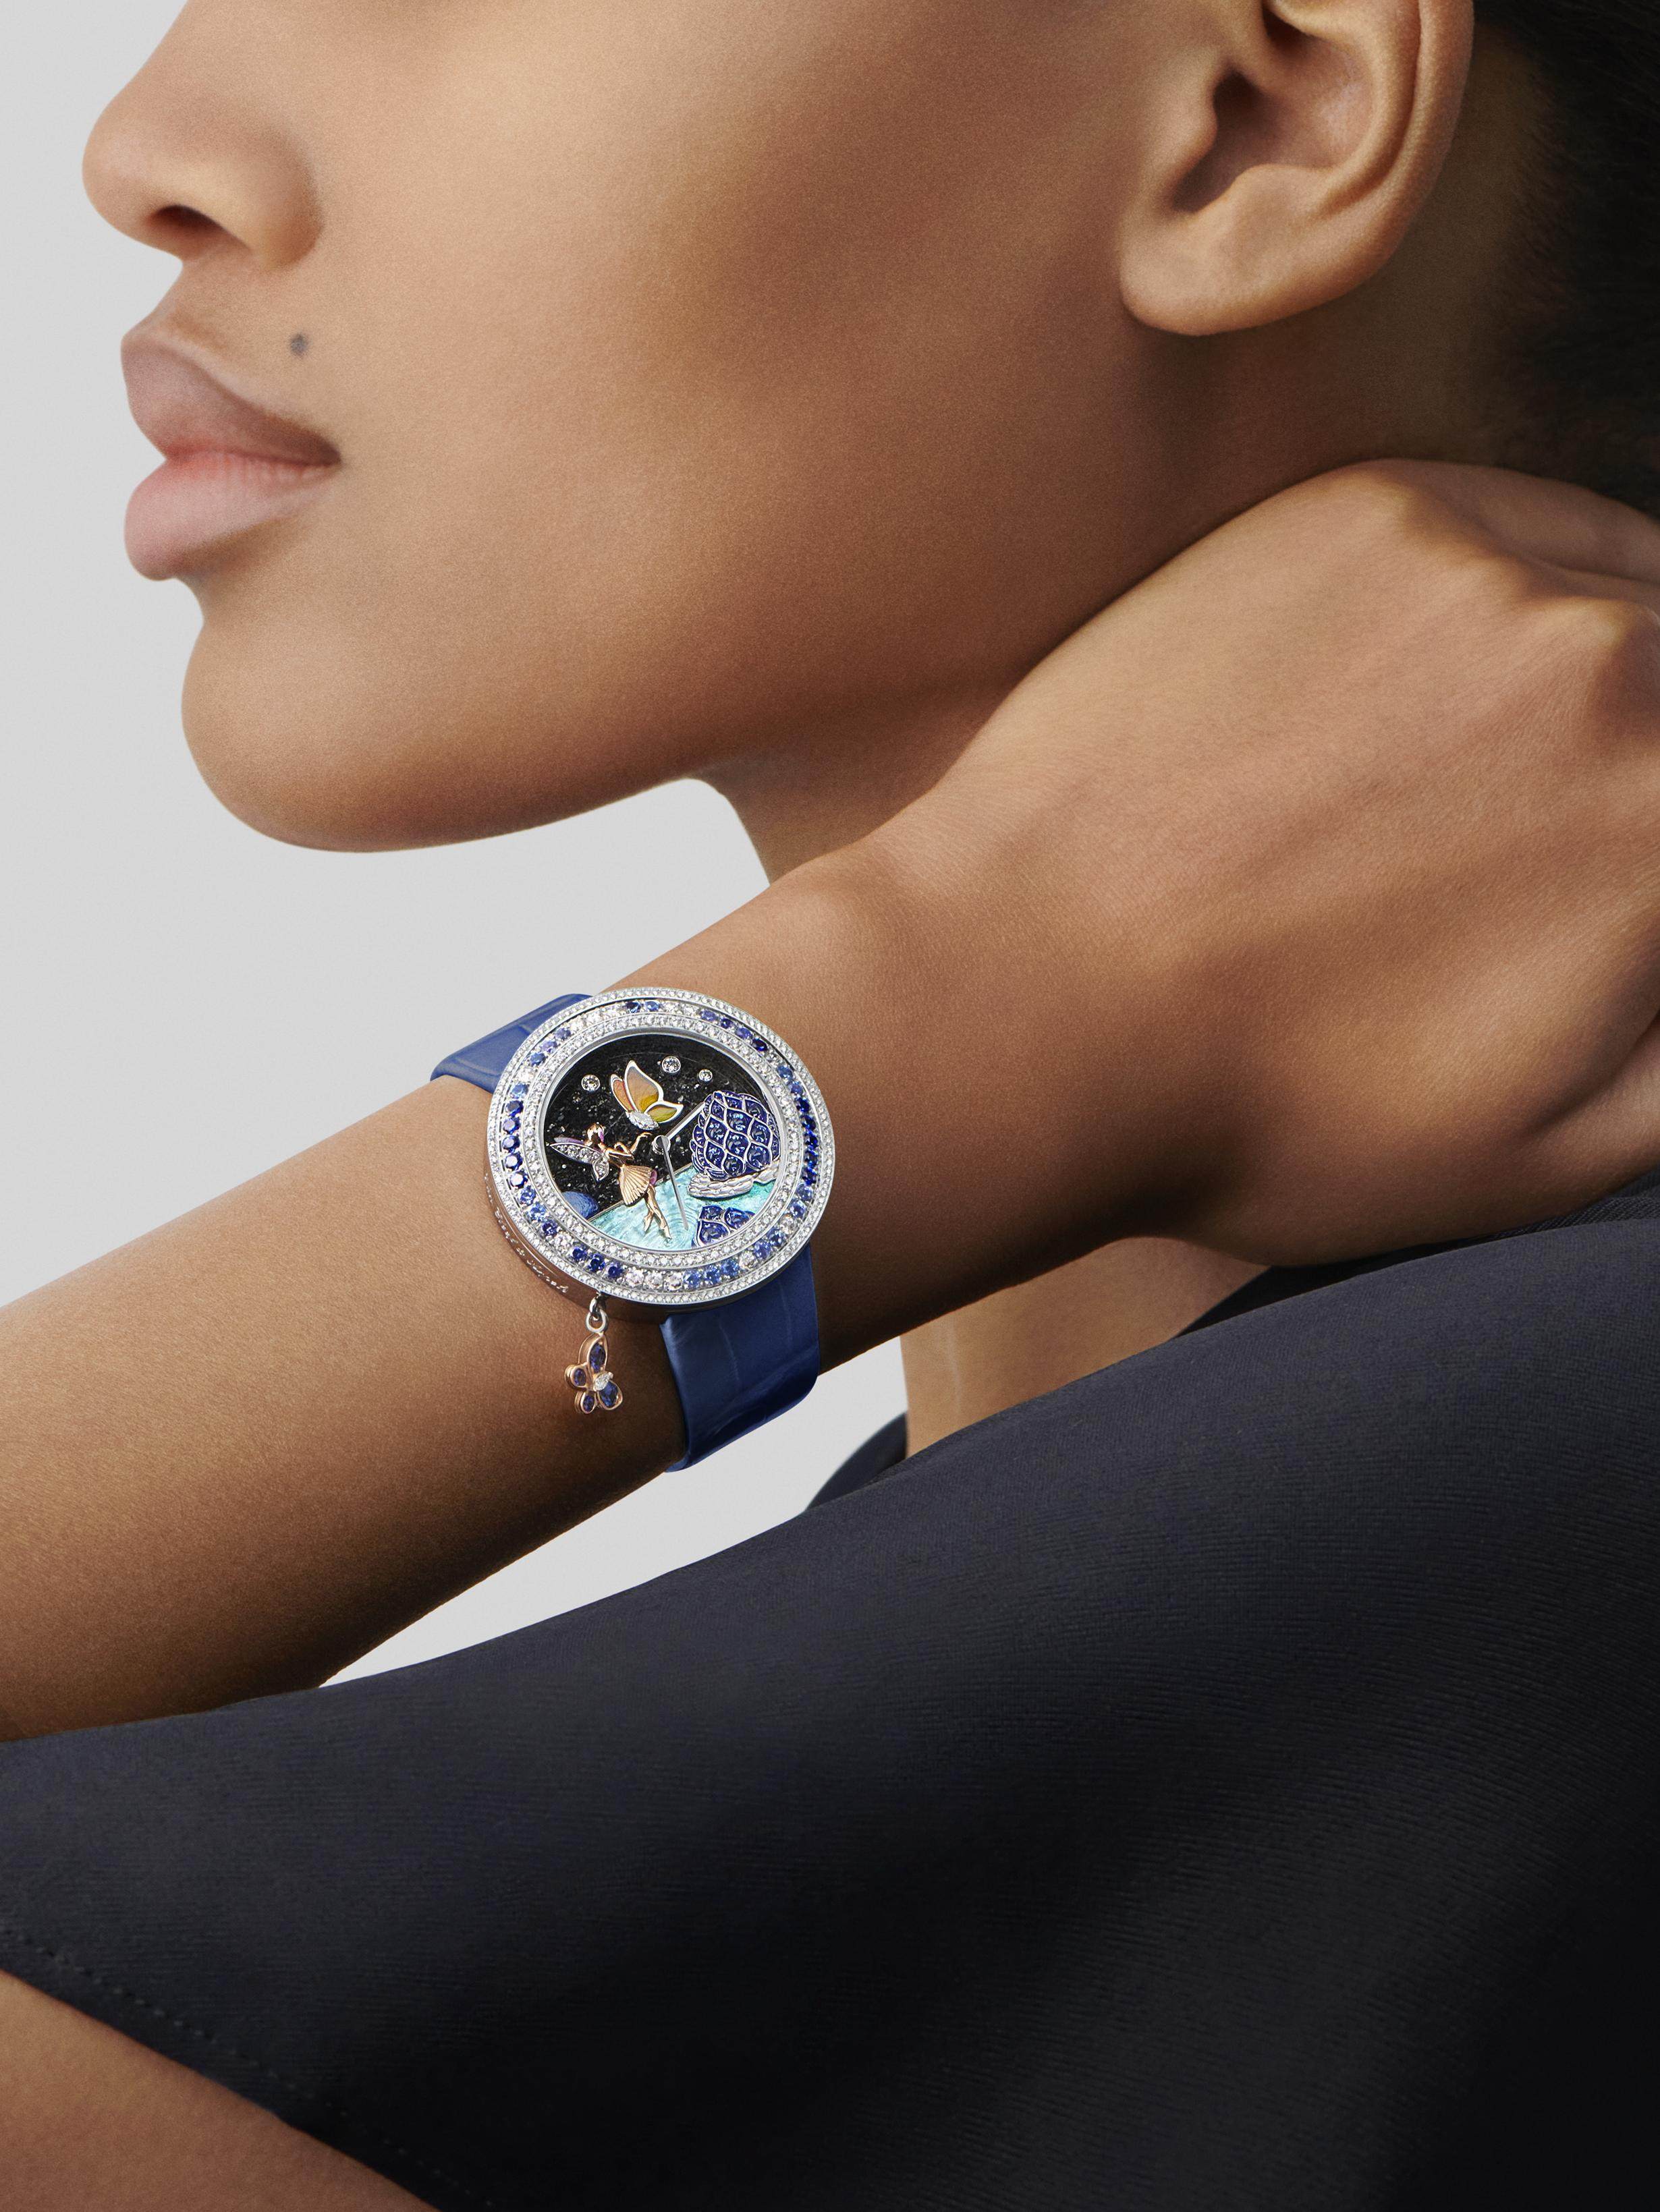 Van Cleef & Arpels’ Charms Papillon Féerique watch from the Extraordinary Dials Collection. Photos: Van Cleef & Arpels